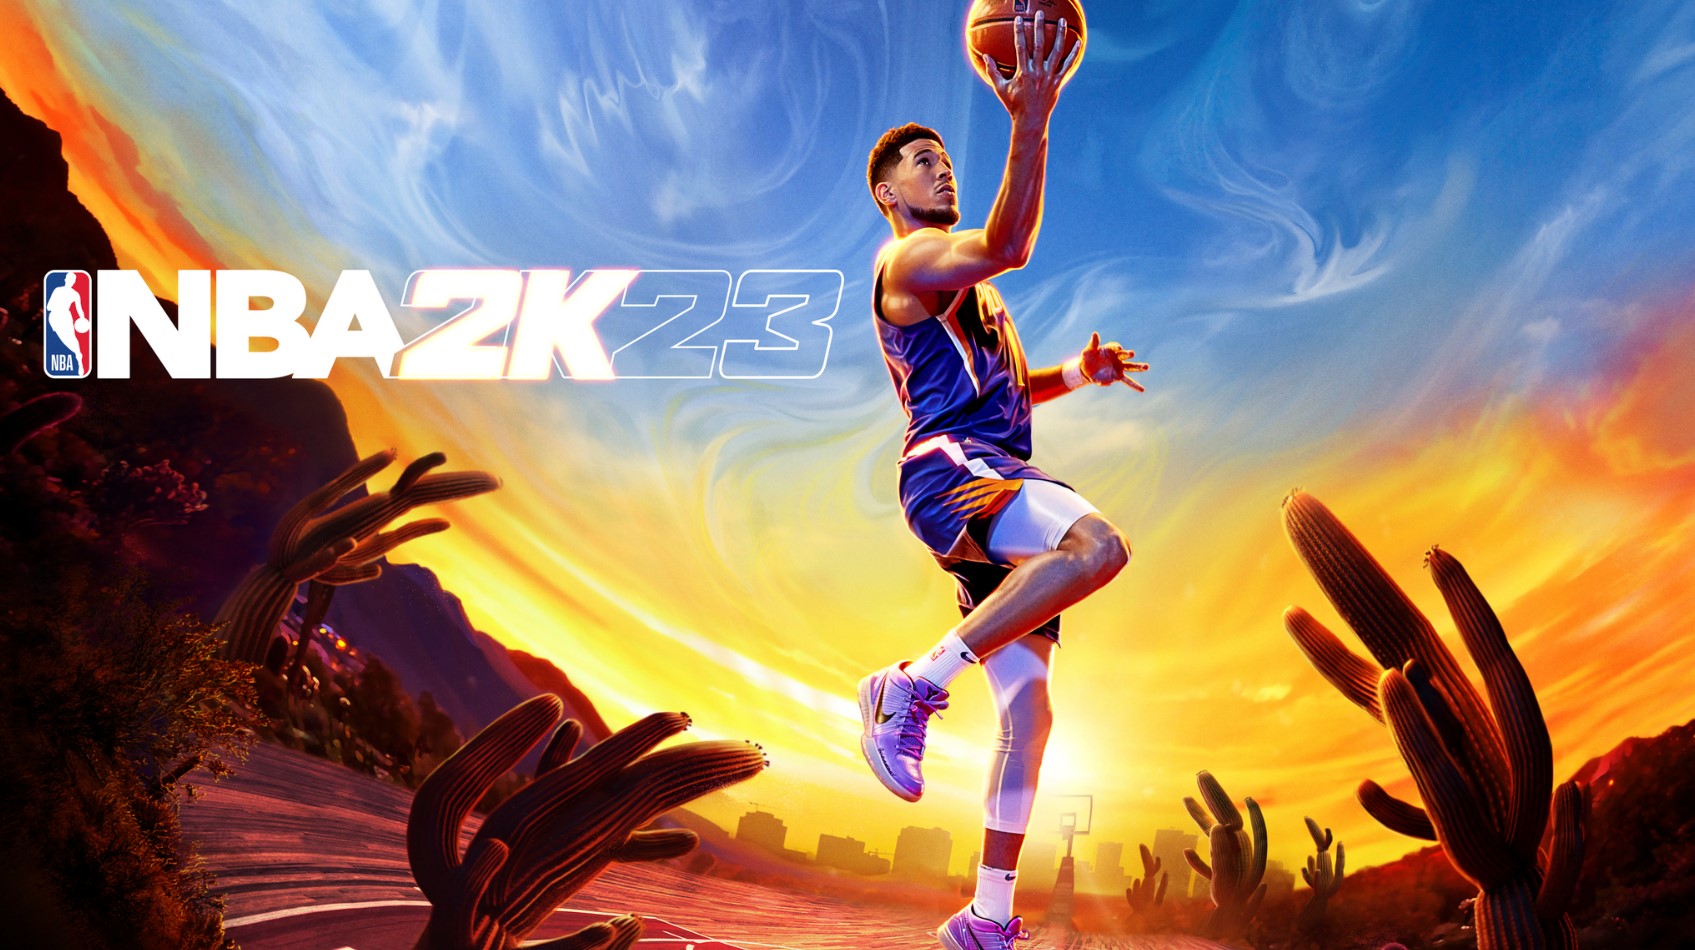 The Championship Edition of NBA 2K23 offers NBA League Pass, Online Event